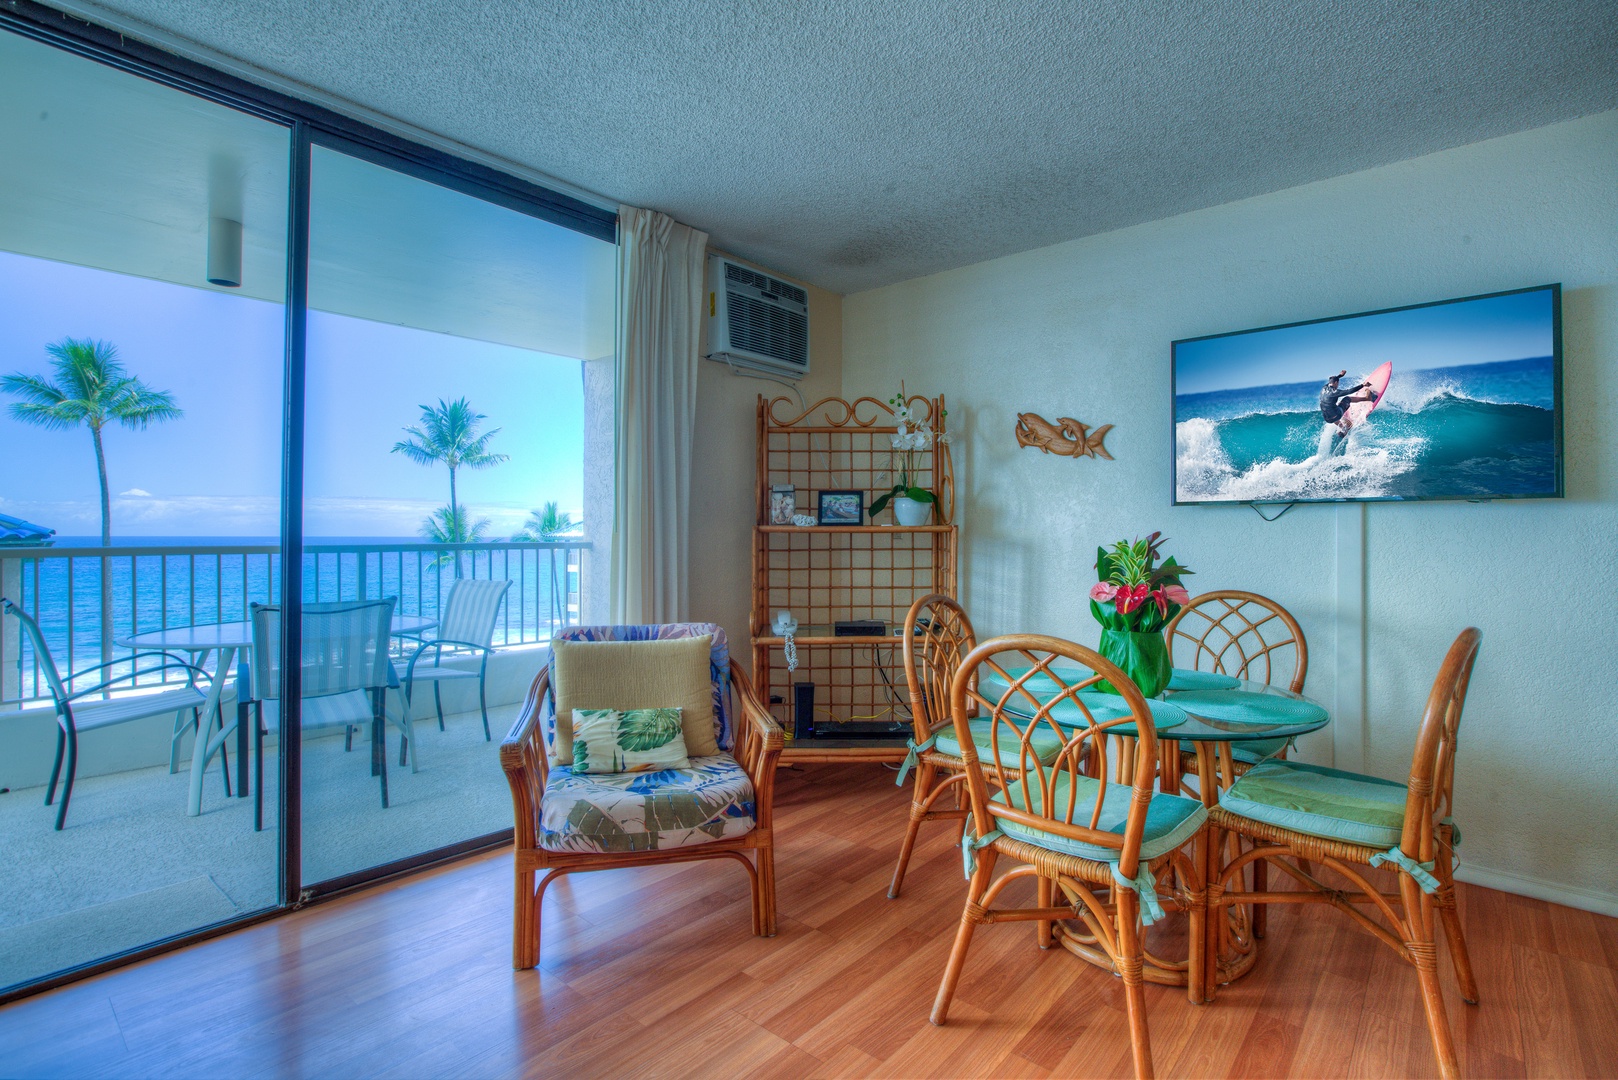 Kailua Kona Vacation Rentals, Kona Reef F11 - Livingroom area, Ocean View Dining Options both Inside and Out.